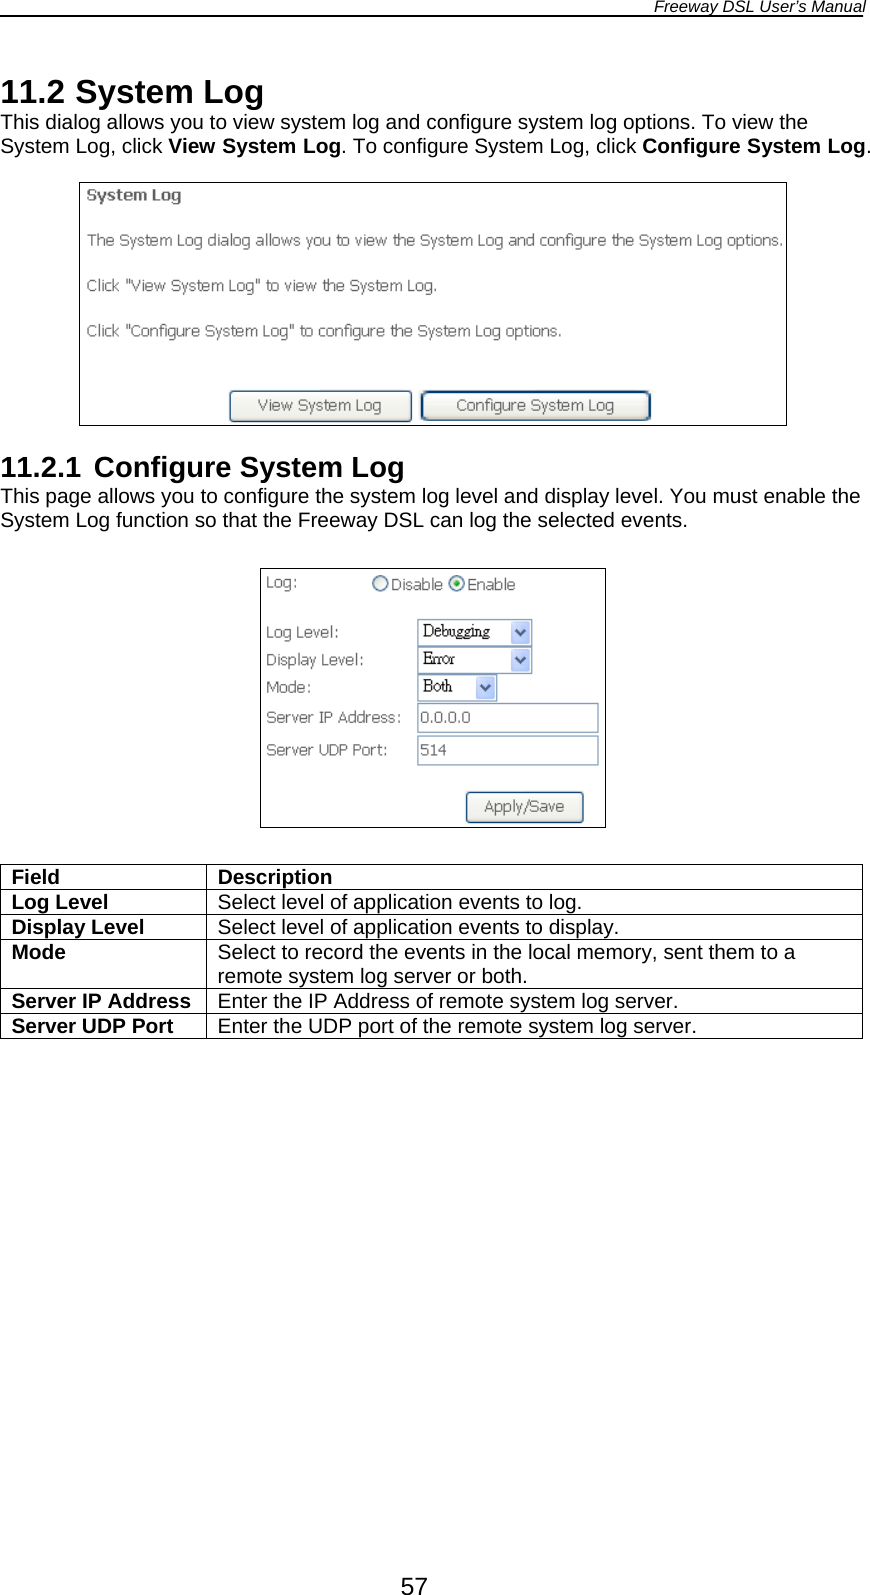 Freeway DSL User’s Manual  57 11.2 System Log This dialog allows you to view system log and configure system log options. To view the System Log, click View System Log. To configure System Log, click Configure System Log.    11.2.1 Configure System Log This page allows you to configure the system log level and display level. You must enable the System Log function so that the Freeway DSL can log the selected events.    Field Description Log Level  Select level of application events to log. Display Level  Select level of application events to display. Mode  Select to record the events in the local memory, sent them to a remote system log server or both. Server IP Address Enter the IP Address of remote system log server. Server UDP Port  Enter the UDP port of the remote system log server.  